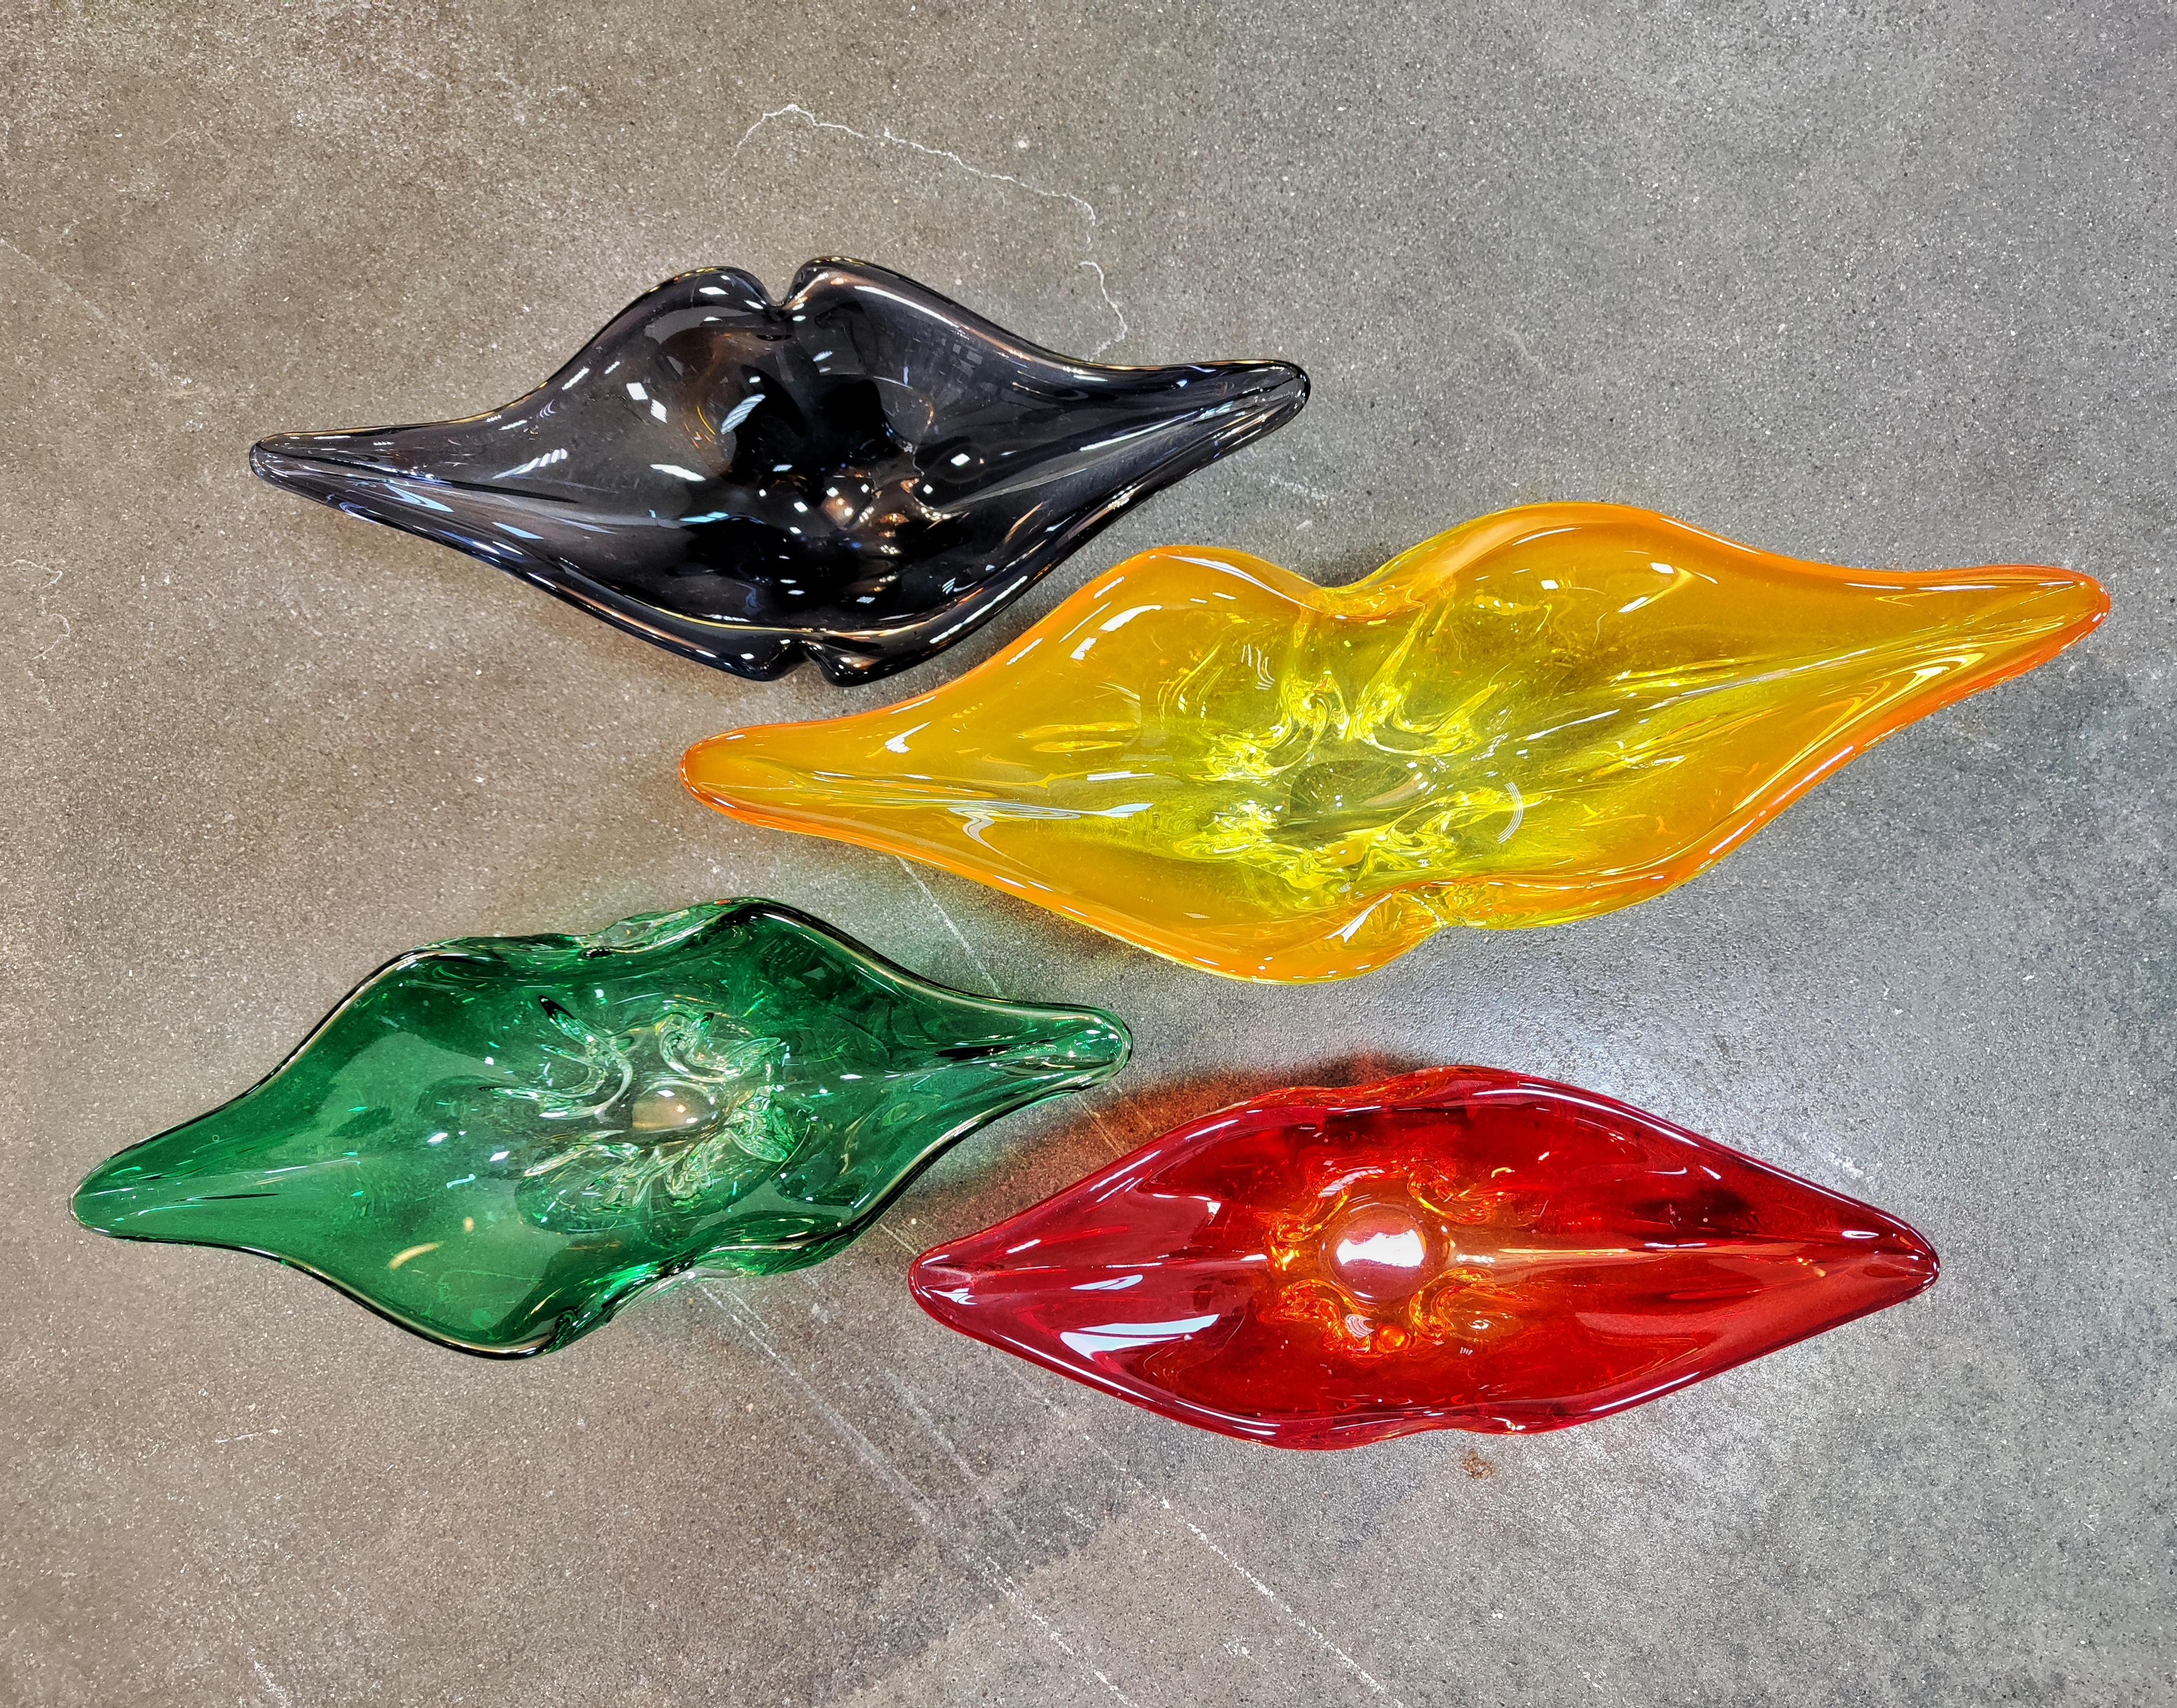 In this listing you will find a set of gorgeous, lips-shaped fruit bowls in vibrant colours, designed by Josef Hospodka. They feature elongated design, with point ends, depicting lips stretched into a smile. Hand blown glass makes their shapes